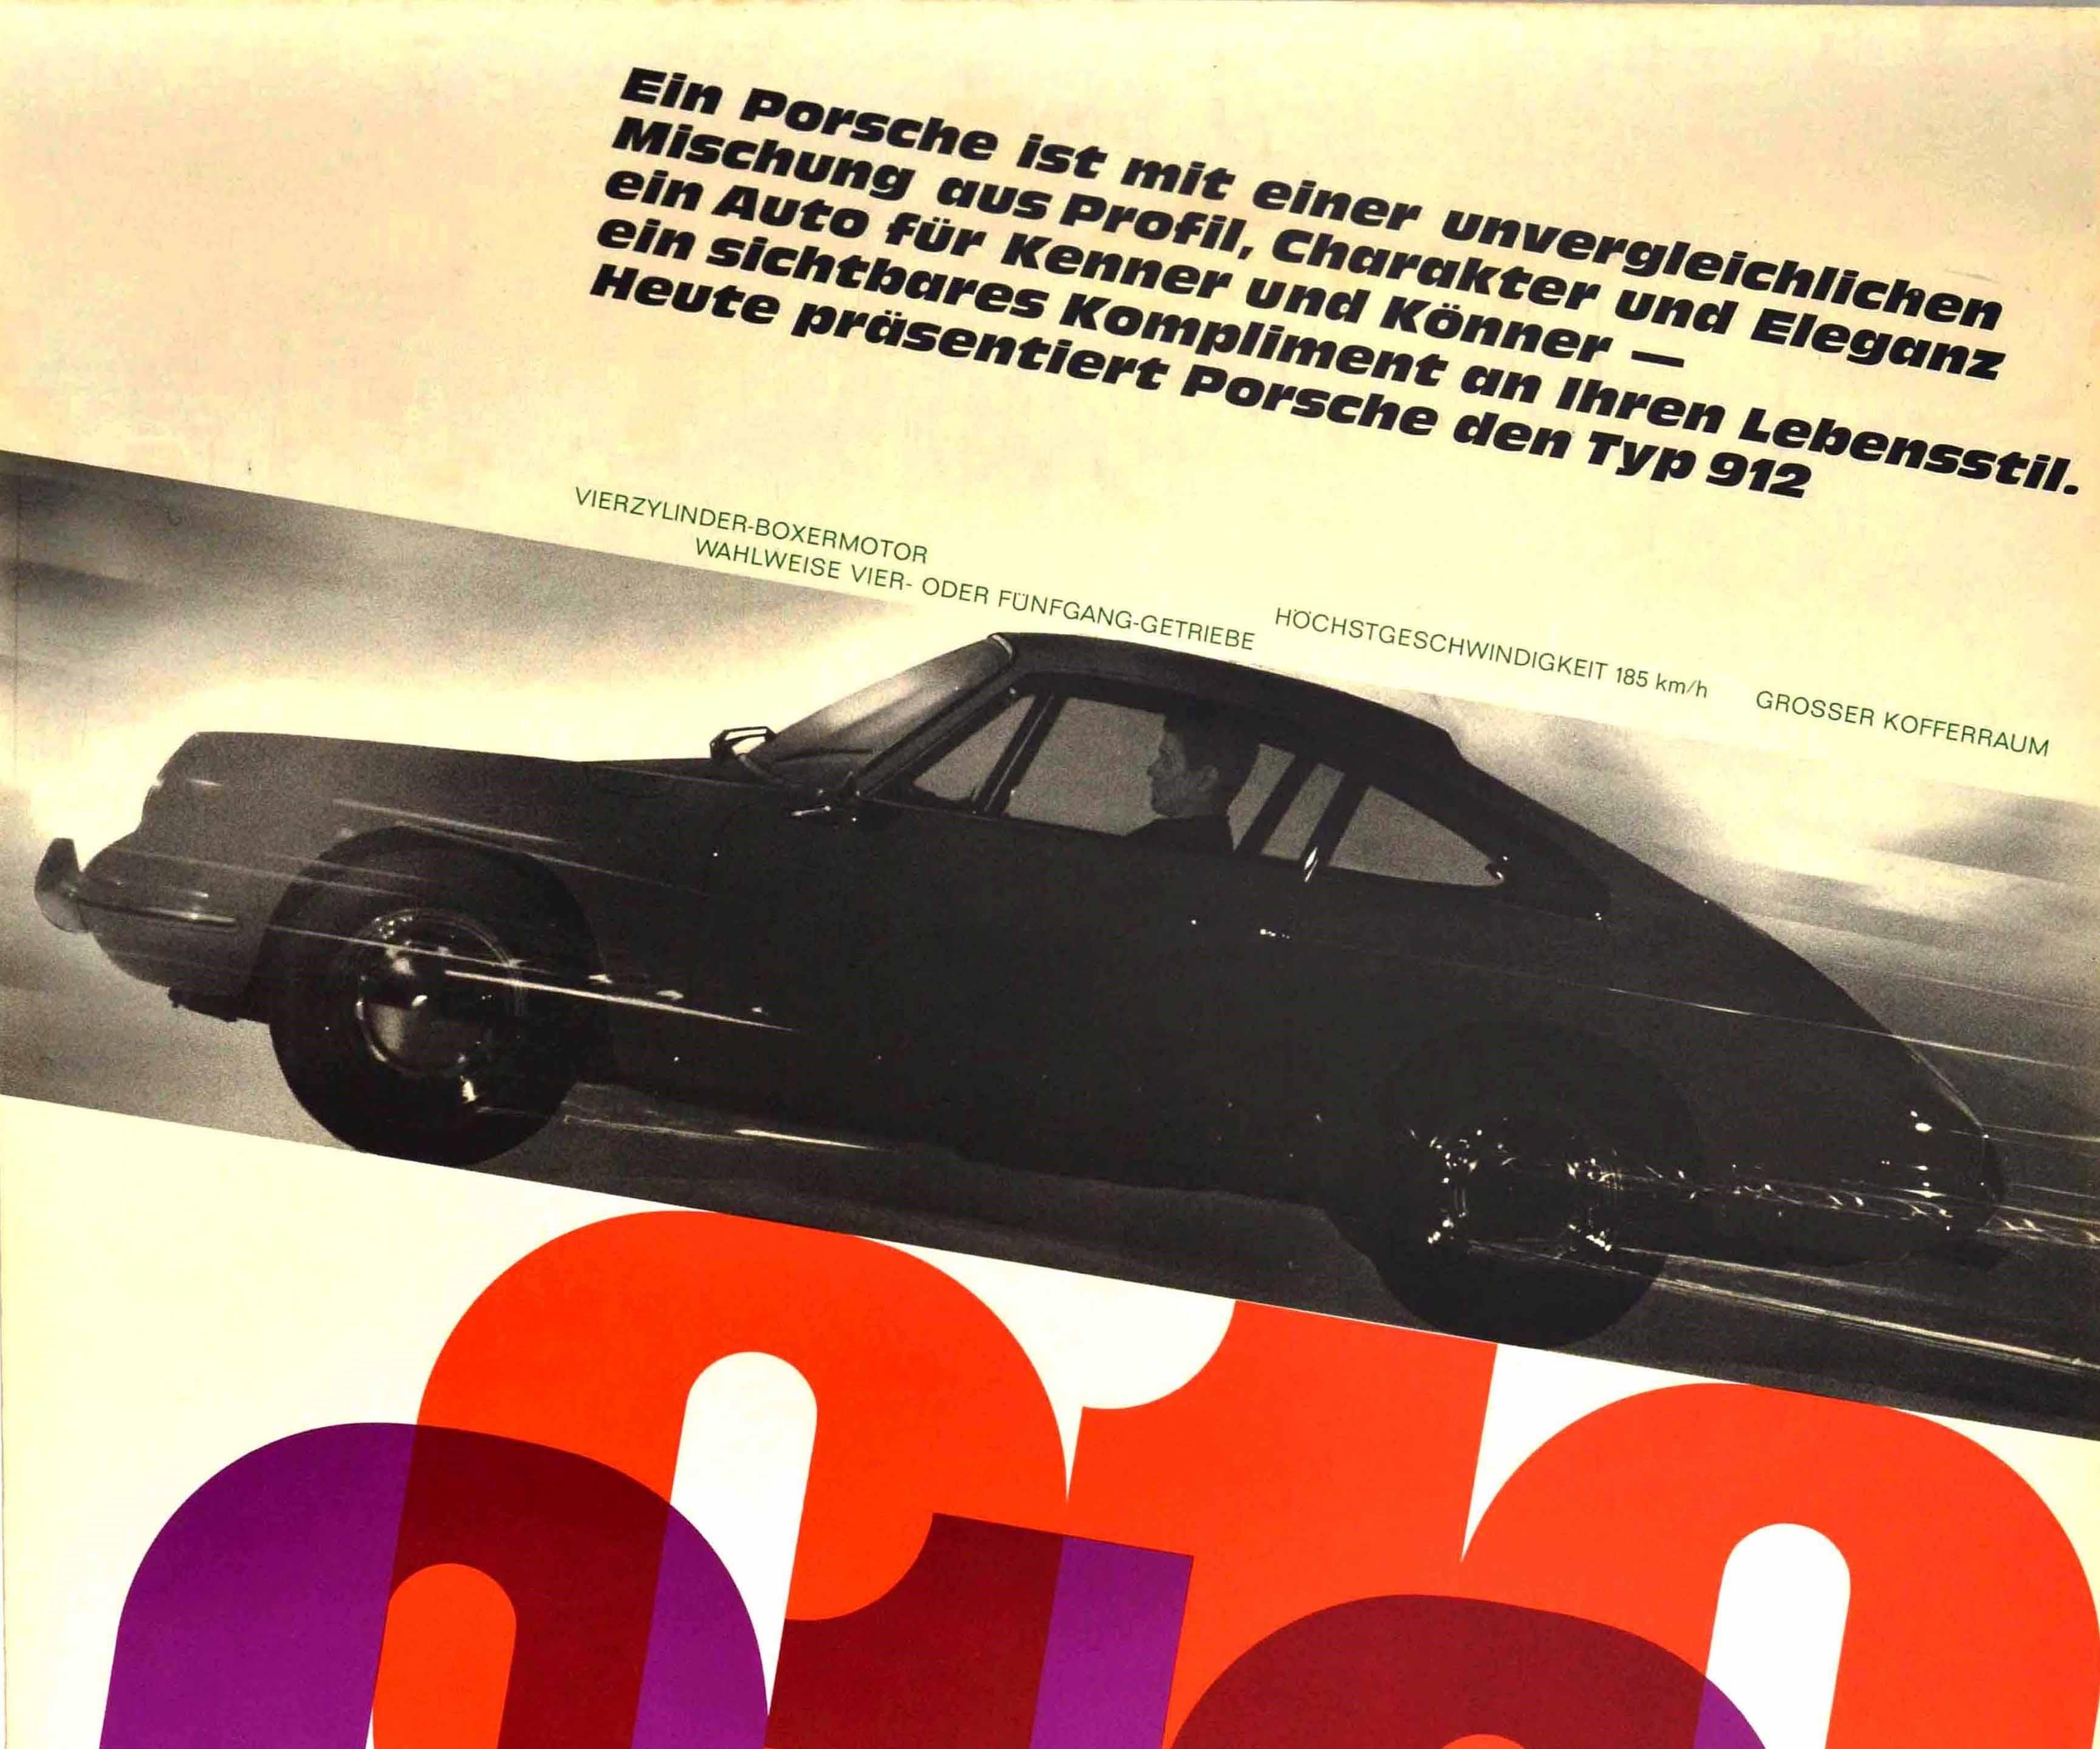 Original vintage car advertising poster for the Porsche 912 featuring a dynamic design depicting a black and white image of a driver in a Porsche car driving at speed diagonally above colourful overlaid numbers 912 and Porsche in black with the text